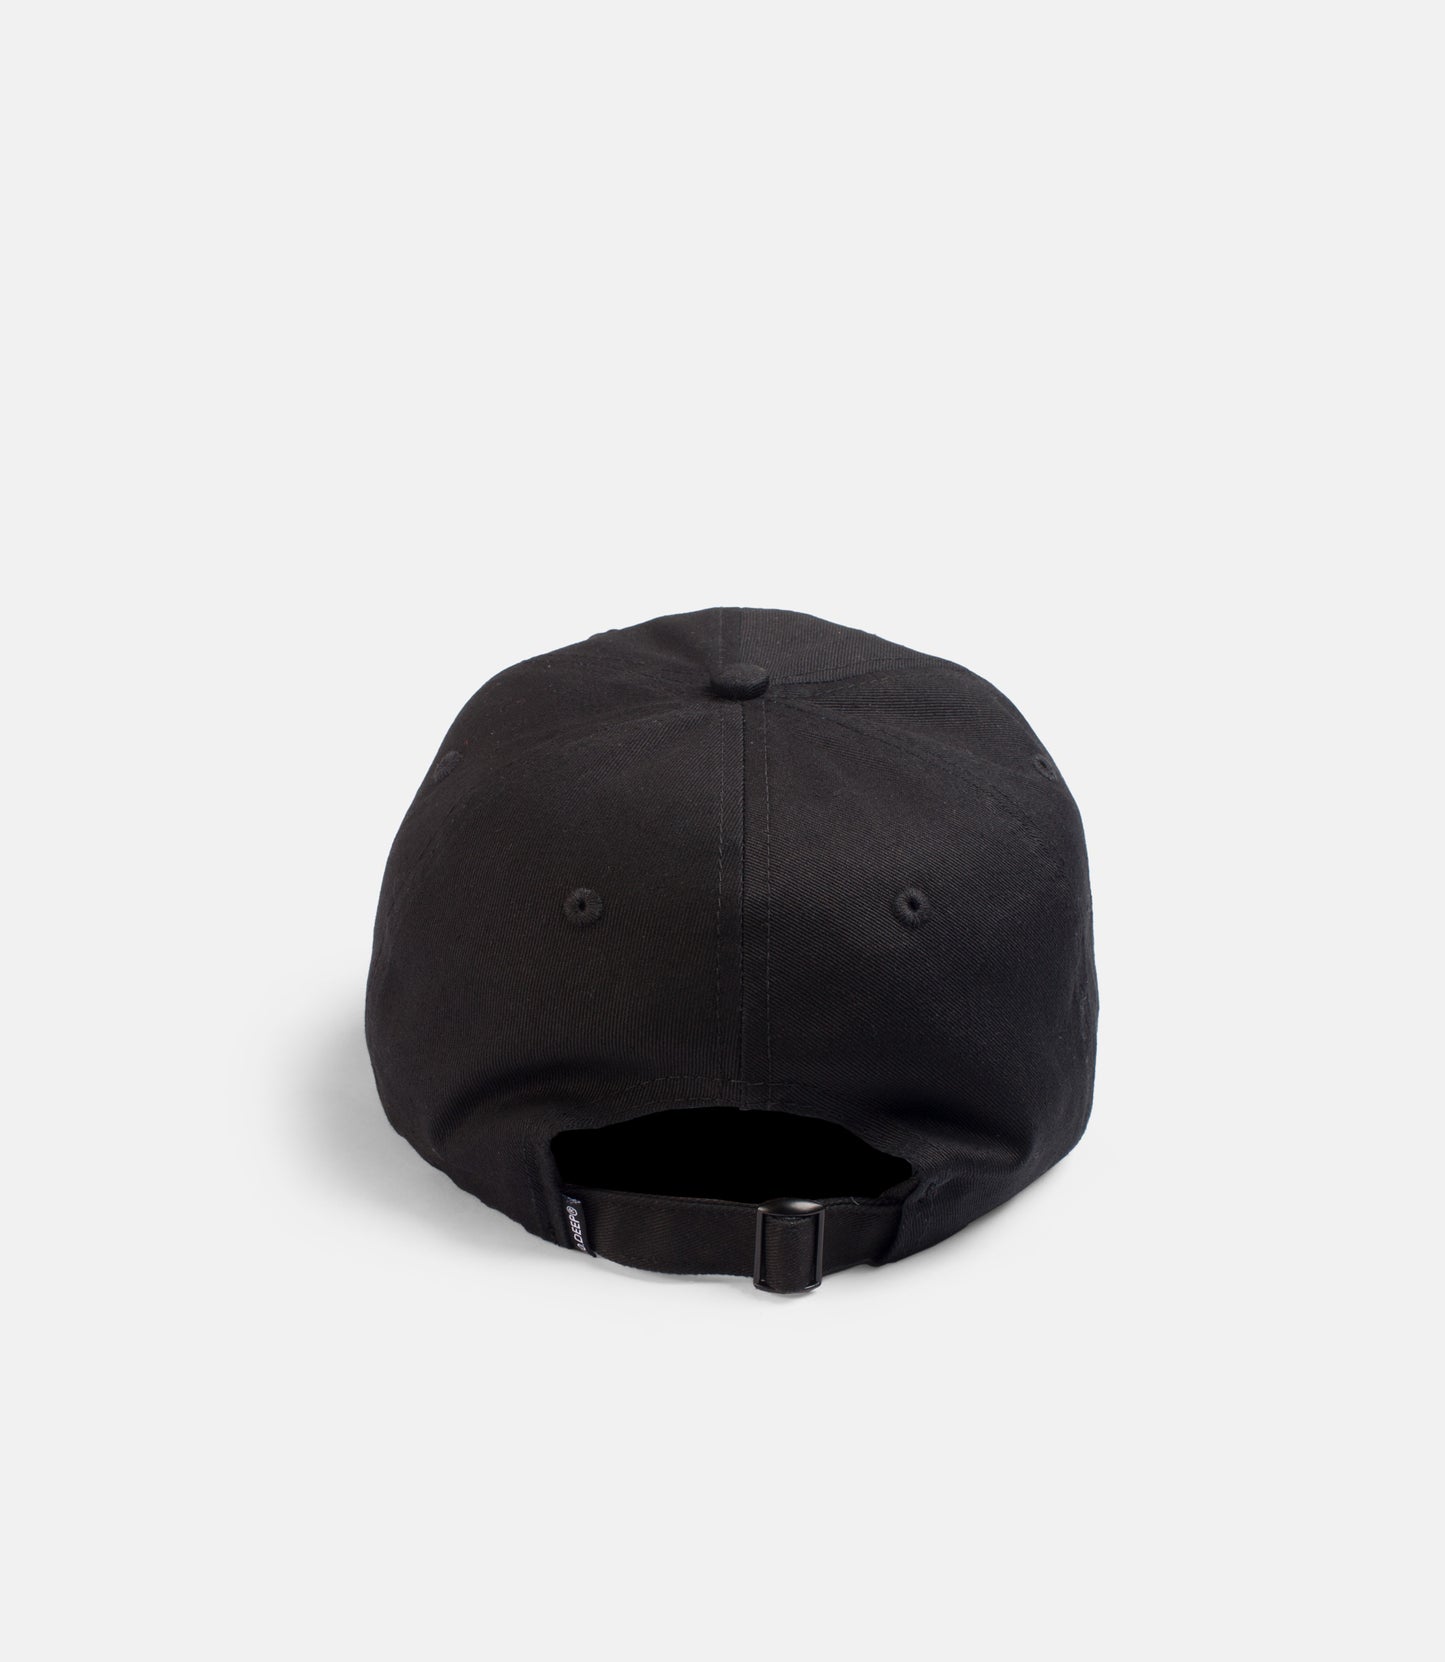 10Deep - All Is Well Dad Hat, Black - The Giant Peach